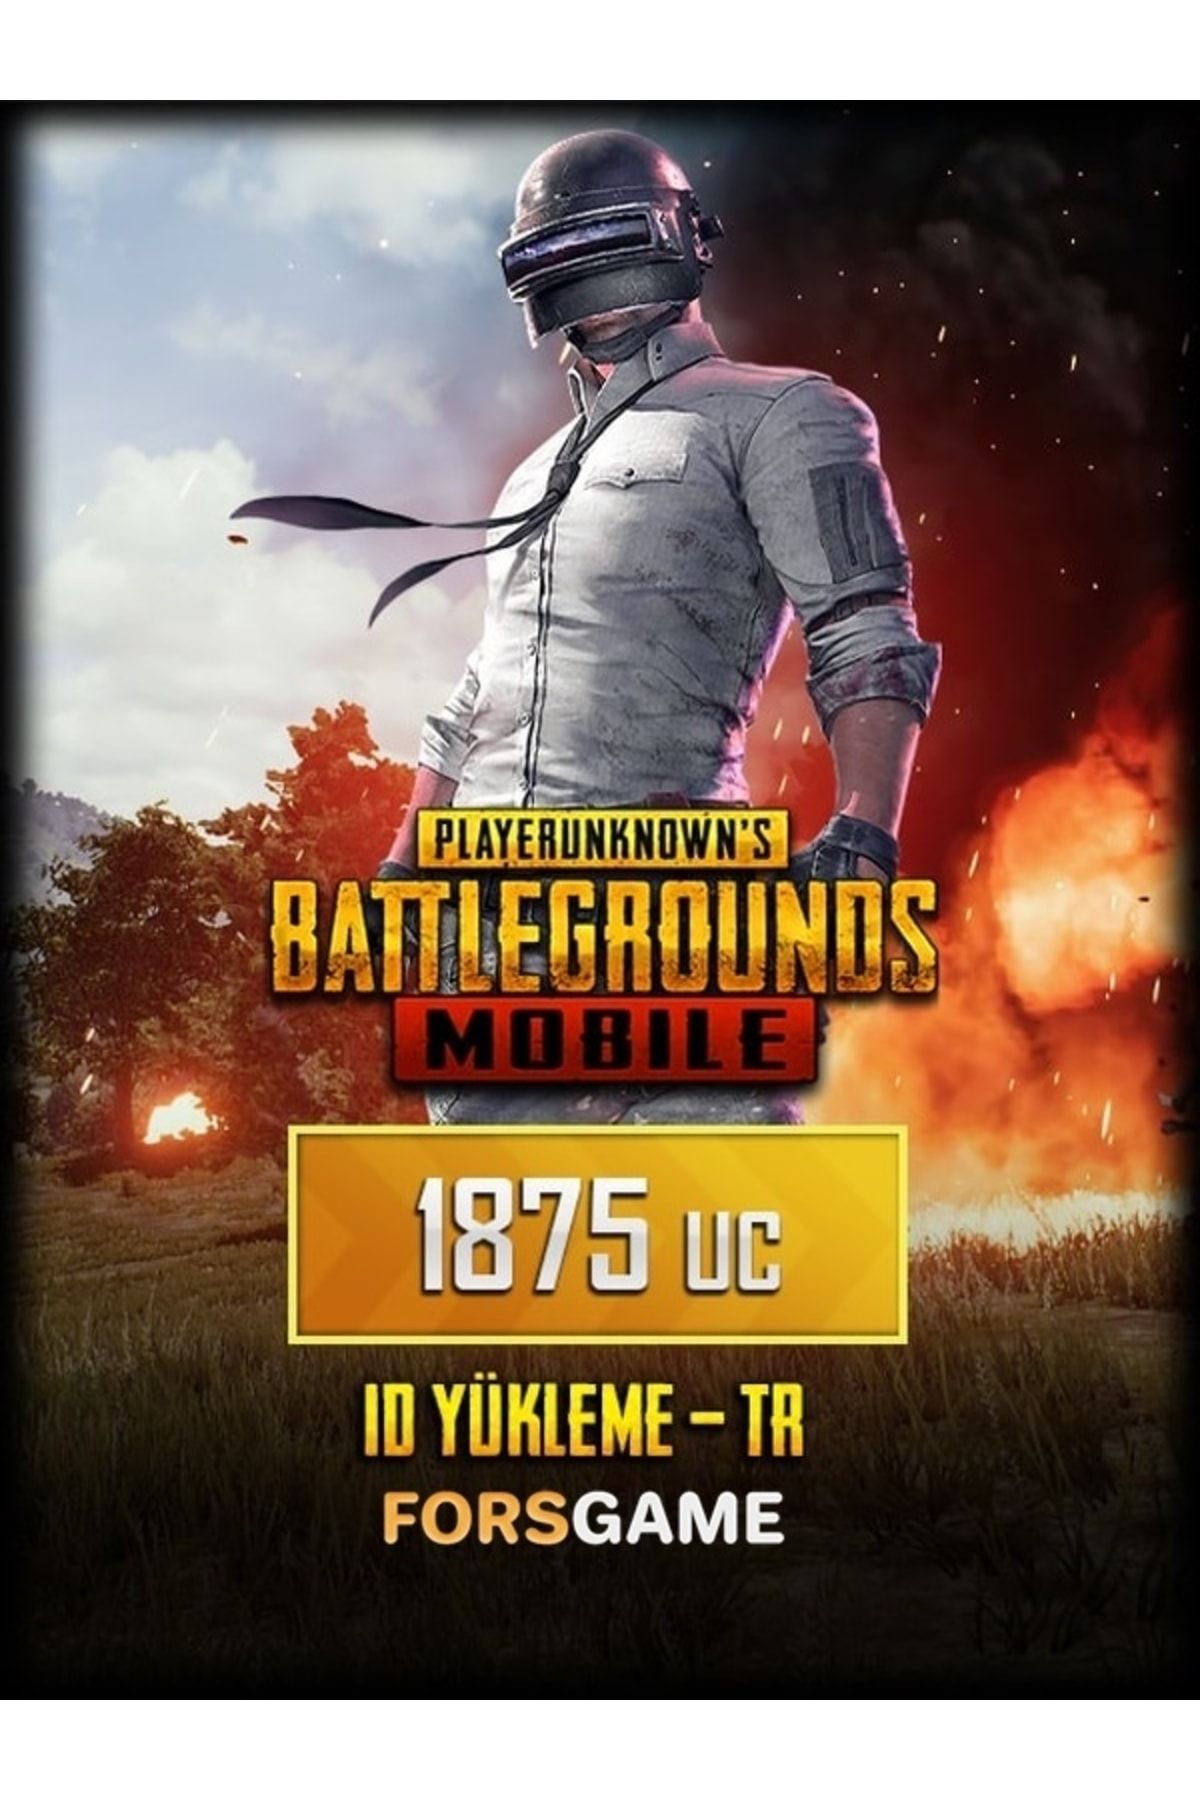 fors game Pubg Mobile 1875 Uc Id Yükleme Tr